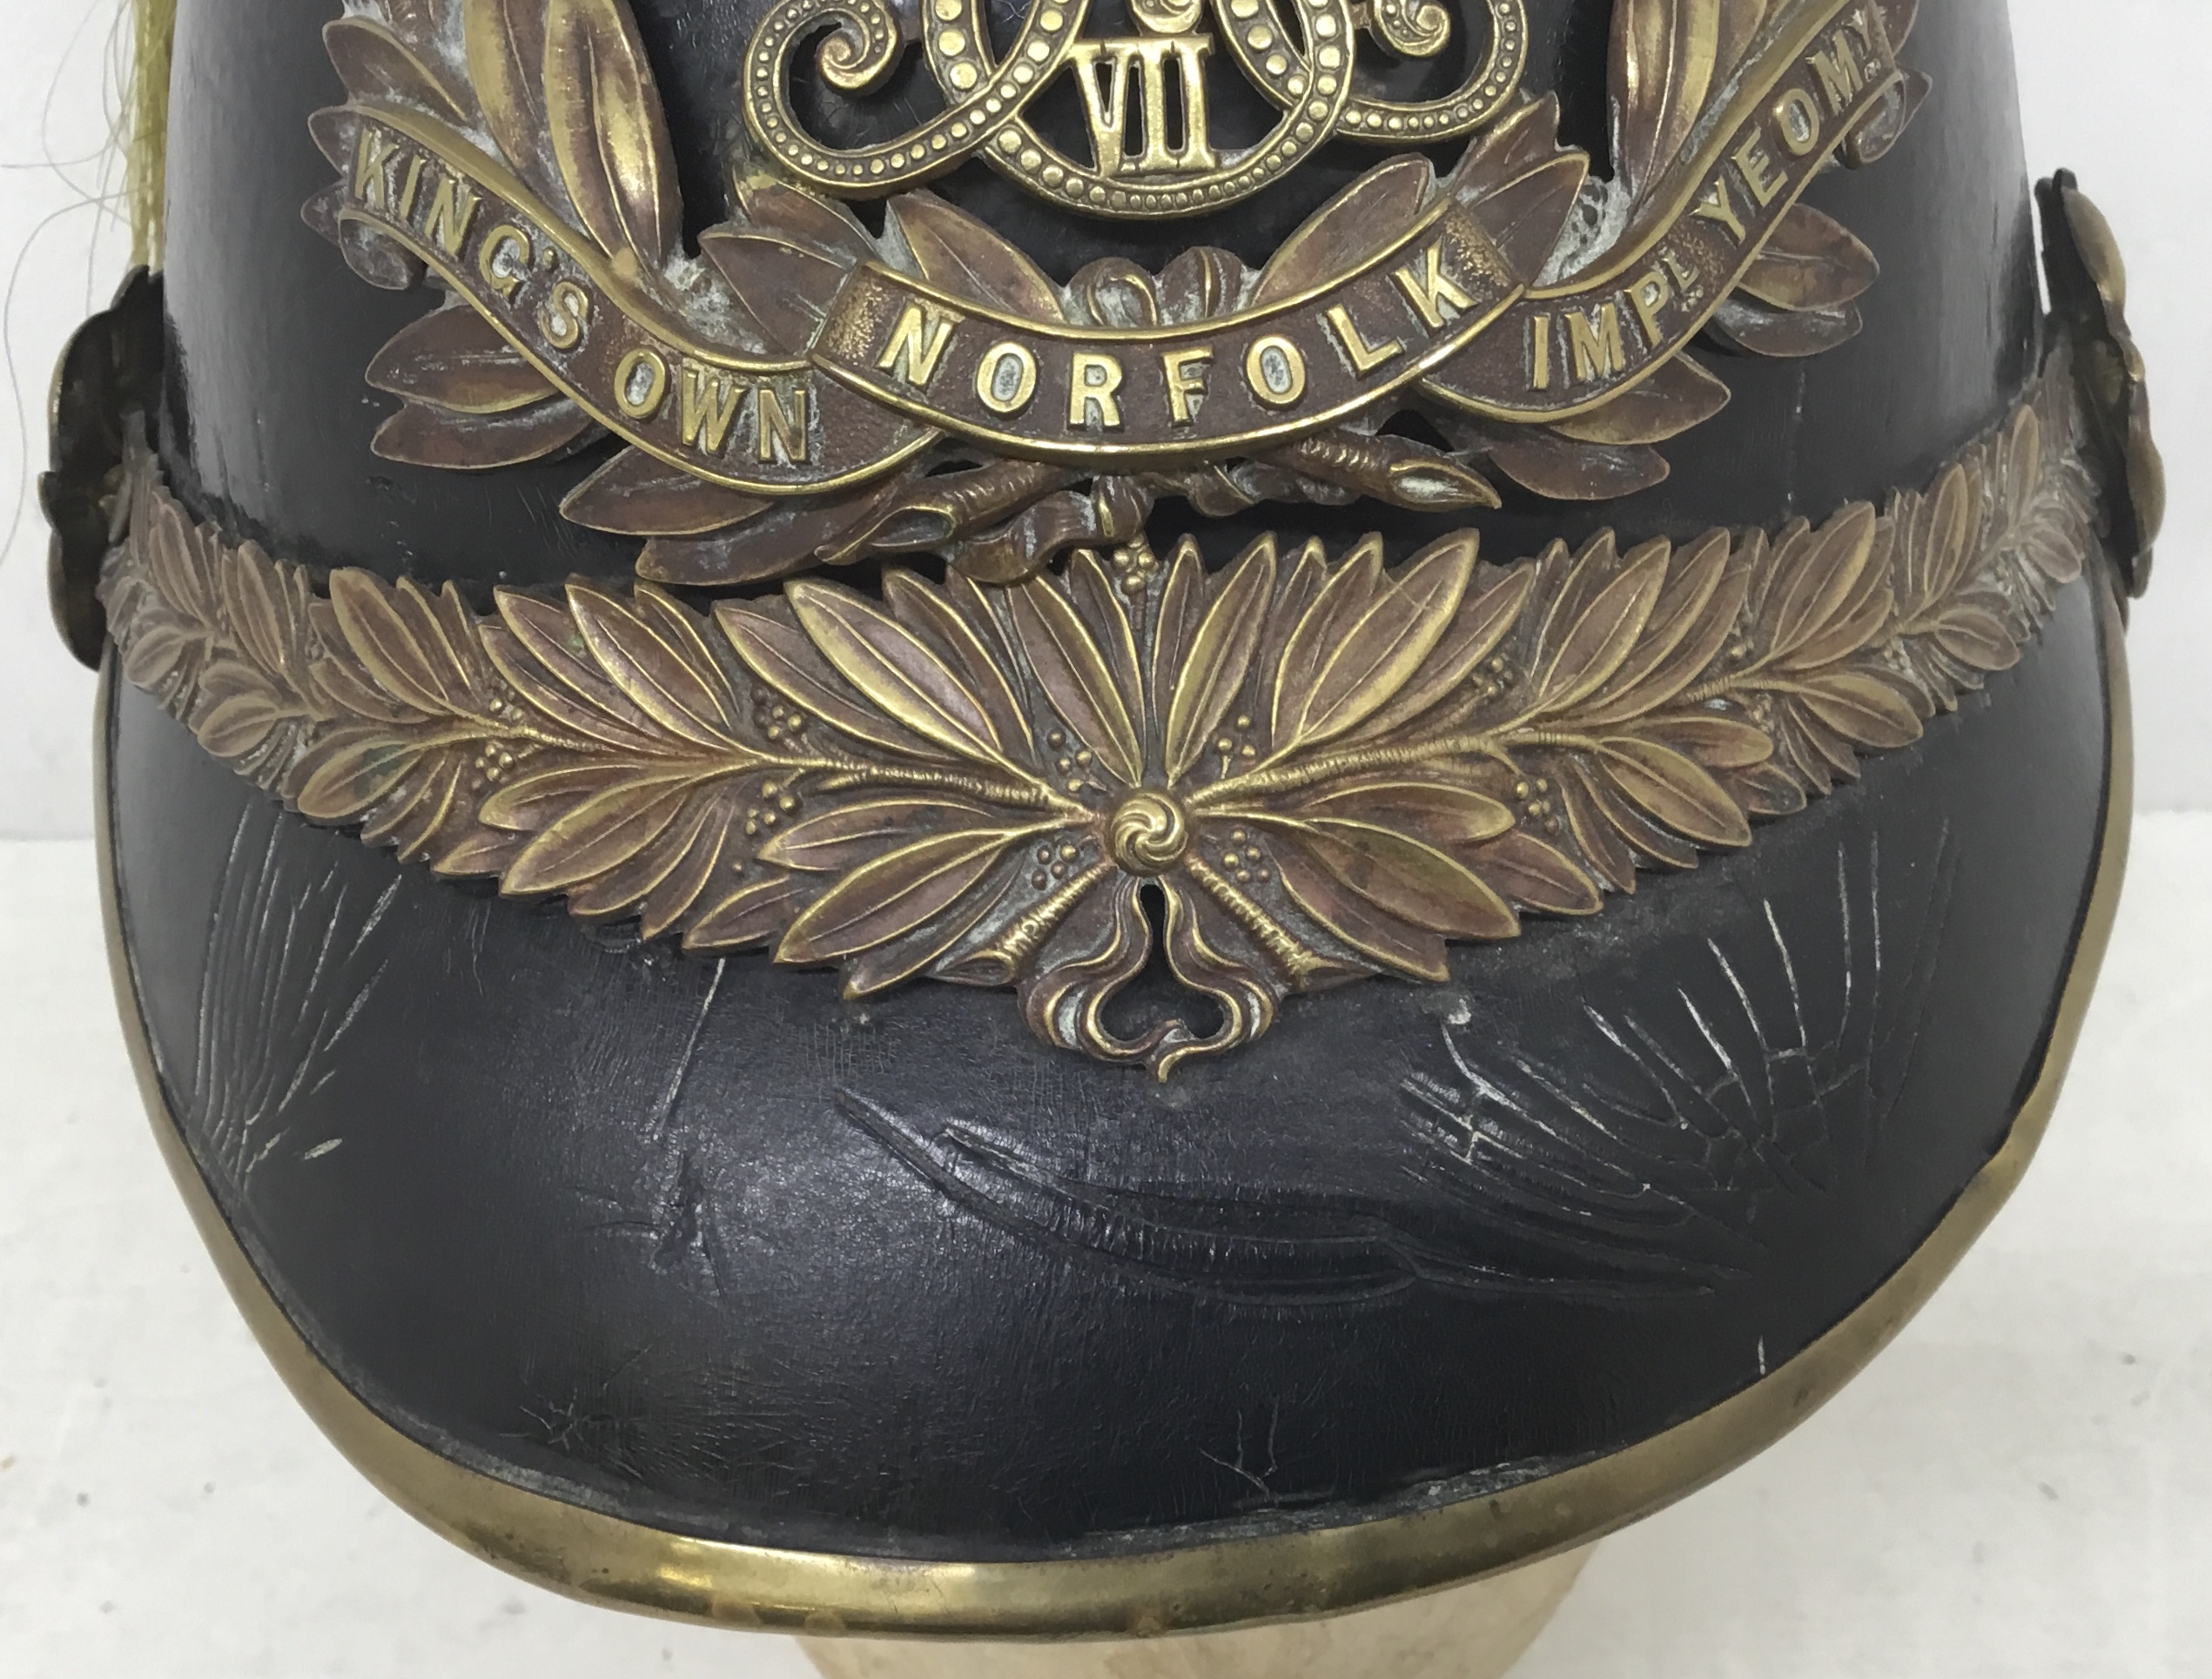 An early 20th century, Edwardian troopers helmet for the King’s Own Norfolk Imperial Yeomanry. - Image 7 of 12